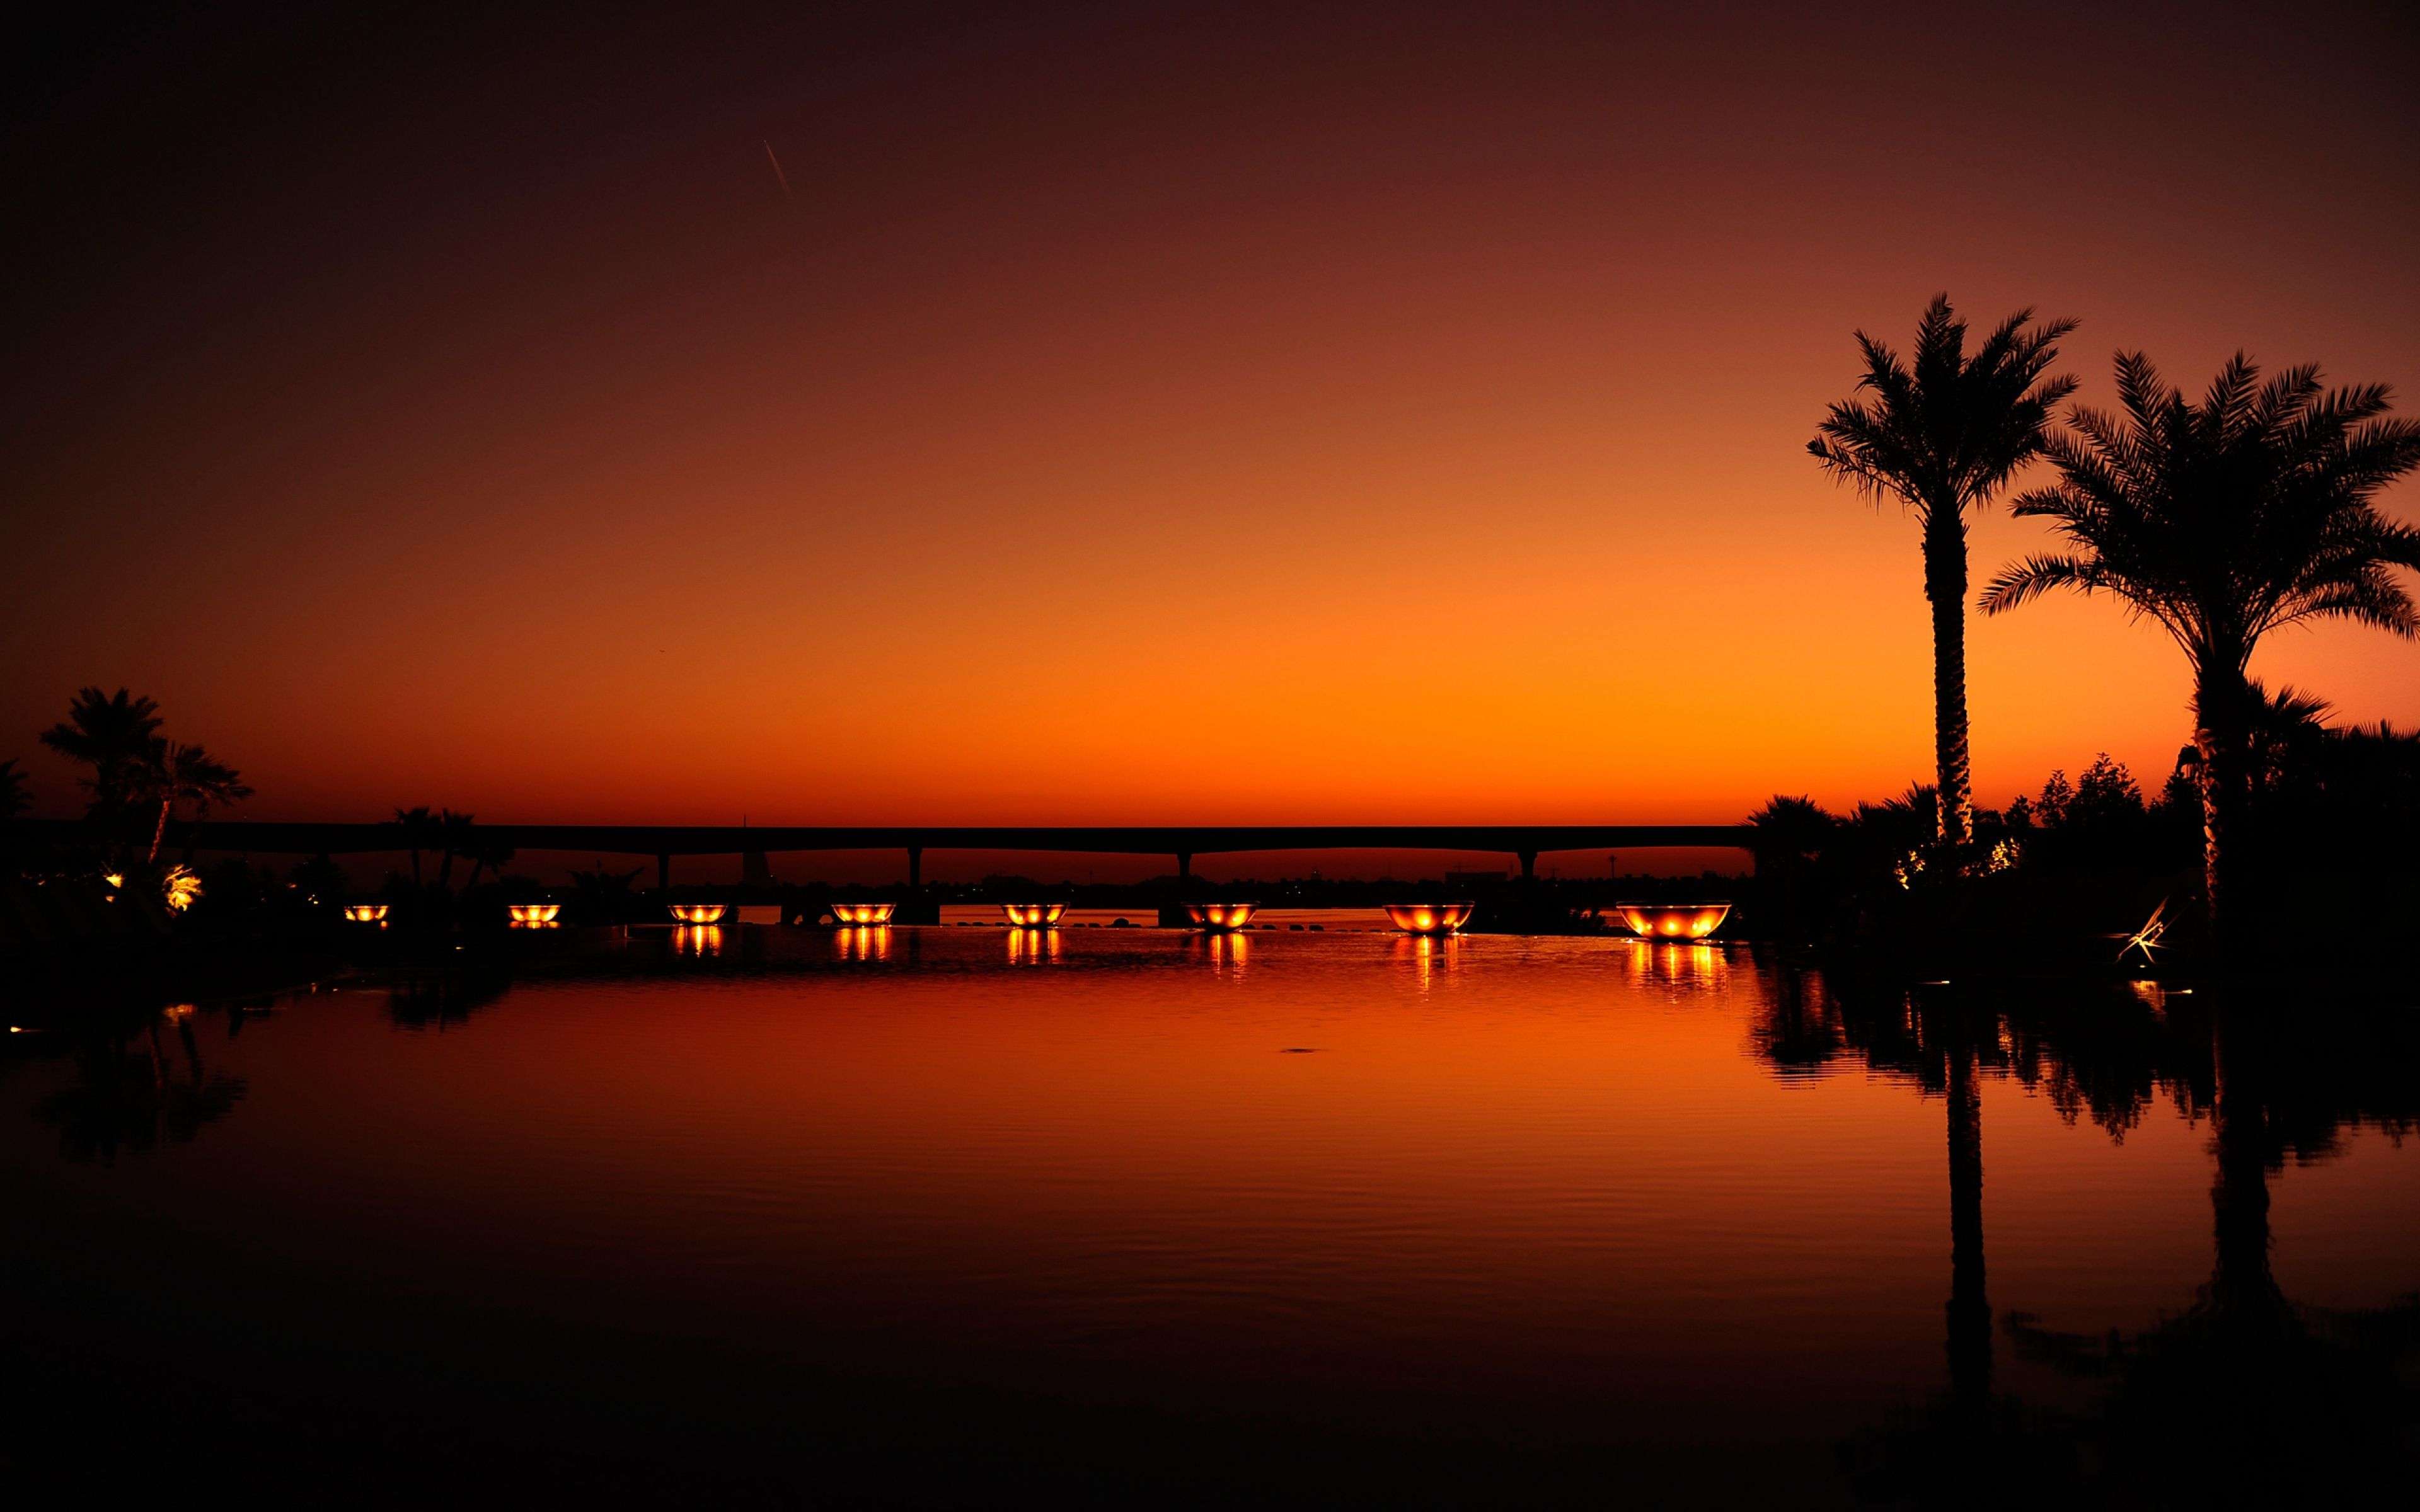 A sunset over water with palm trees - Dark orange